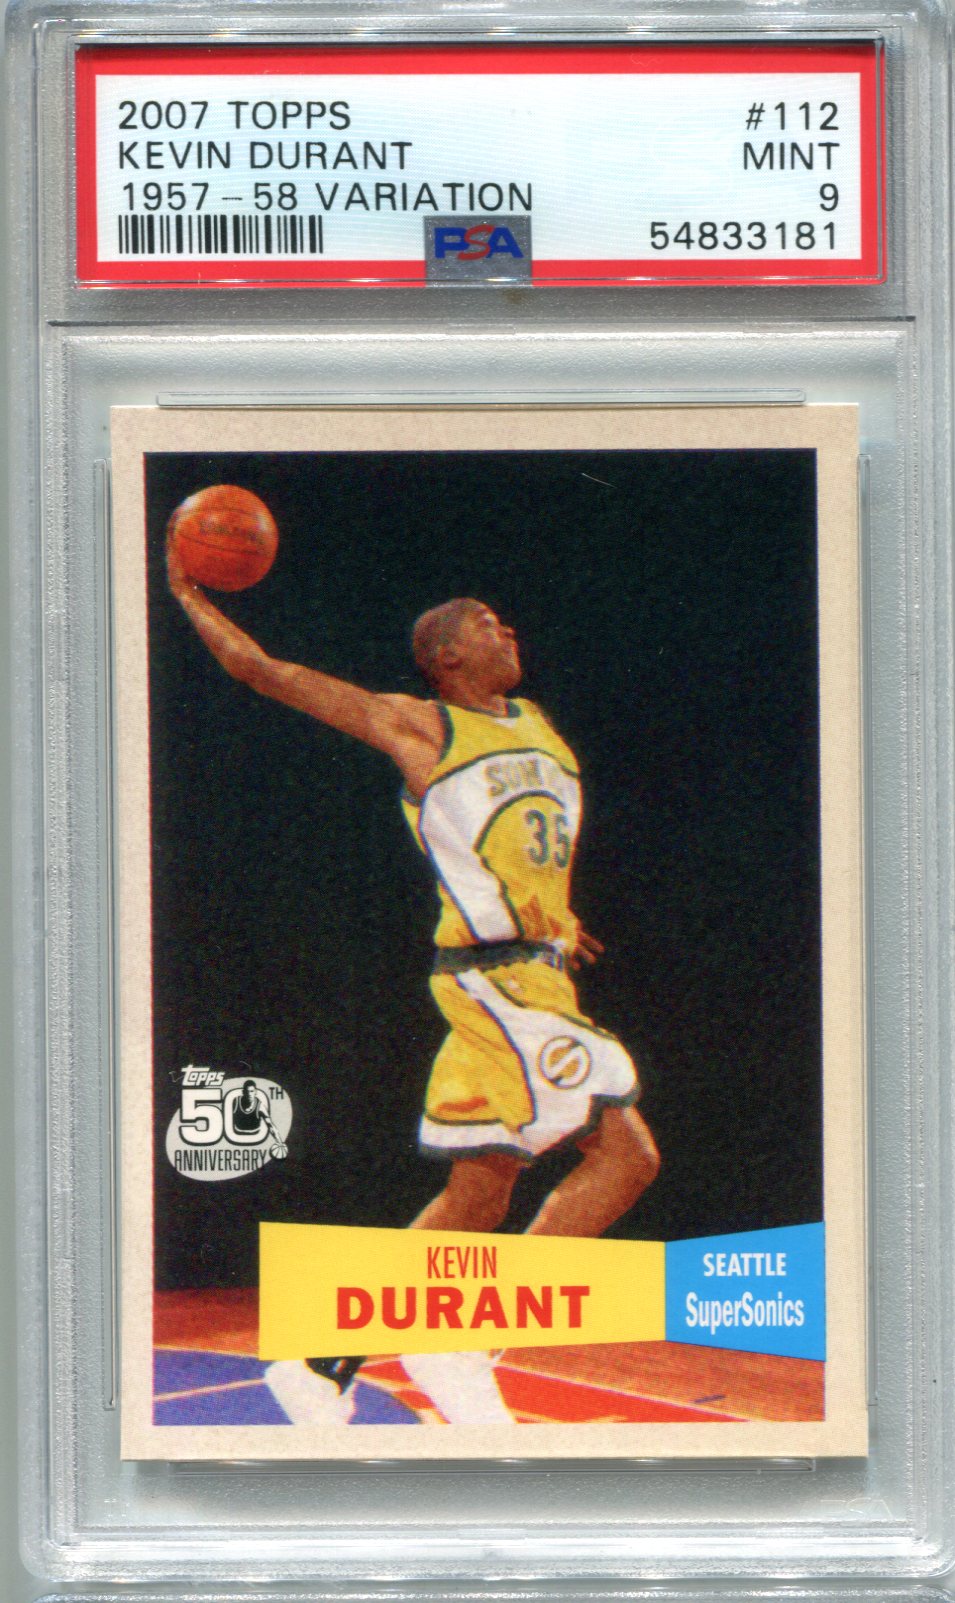 Kevin Durant 2007 2008 Topps Basketball Series Mint Rookie Card #112